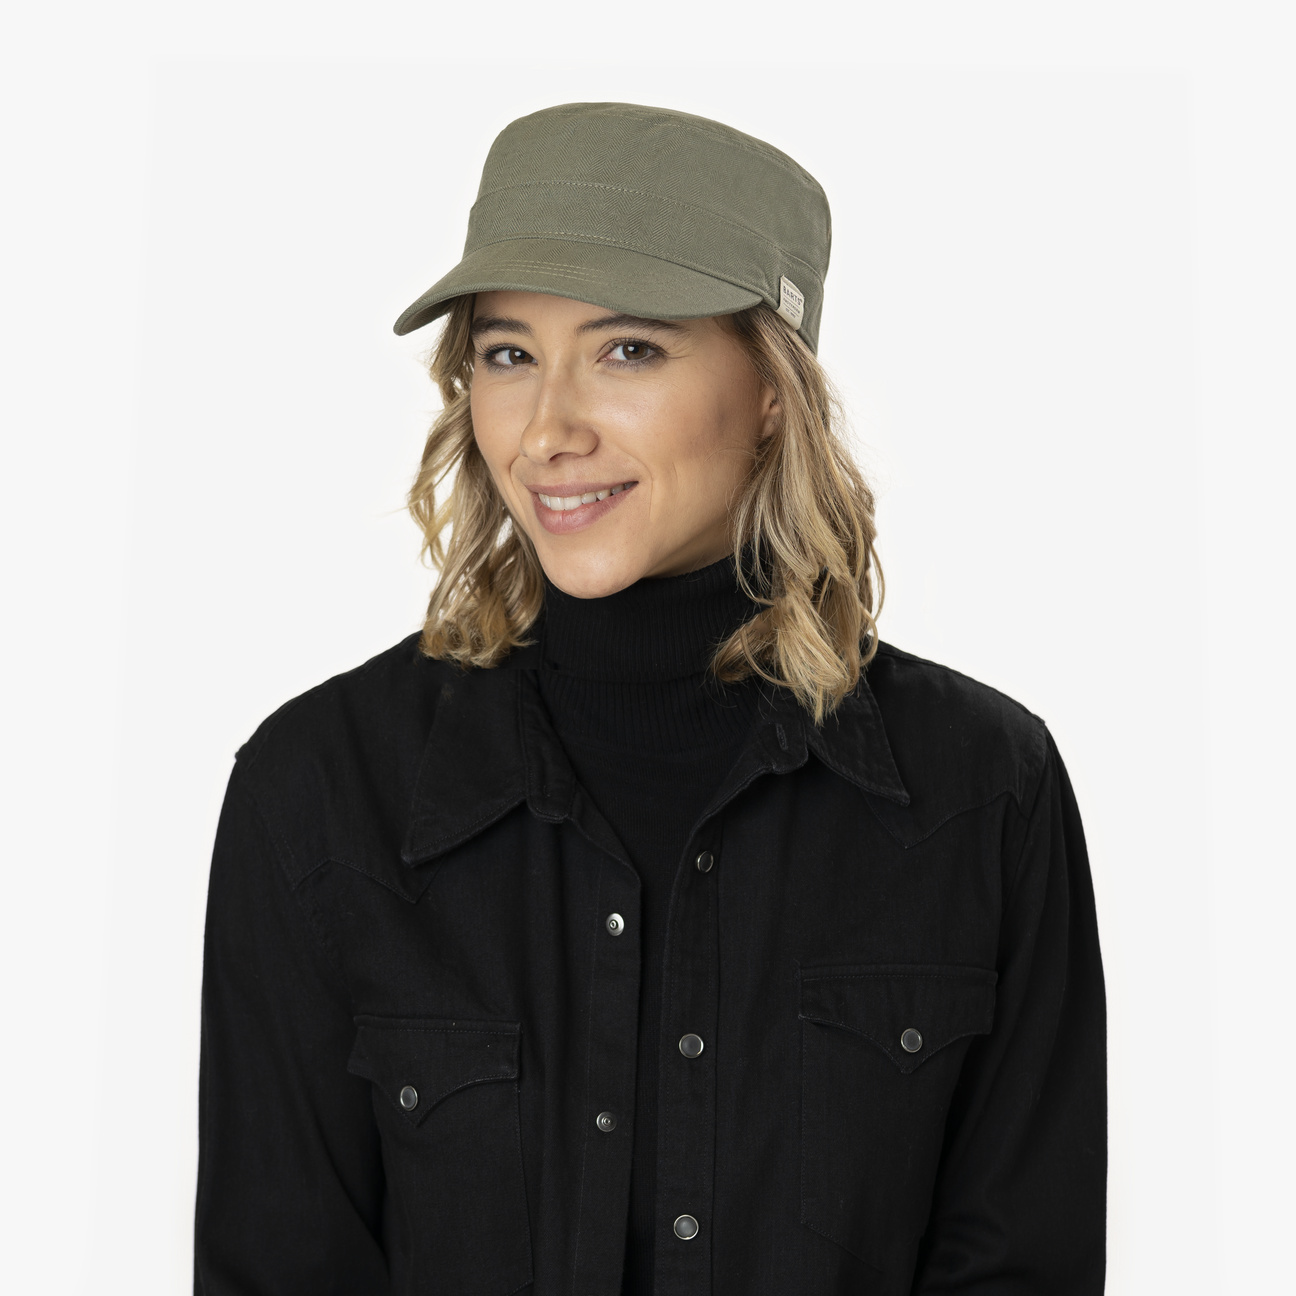 Montania Army Cap by Barts - 32,95 €